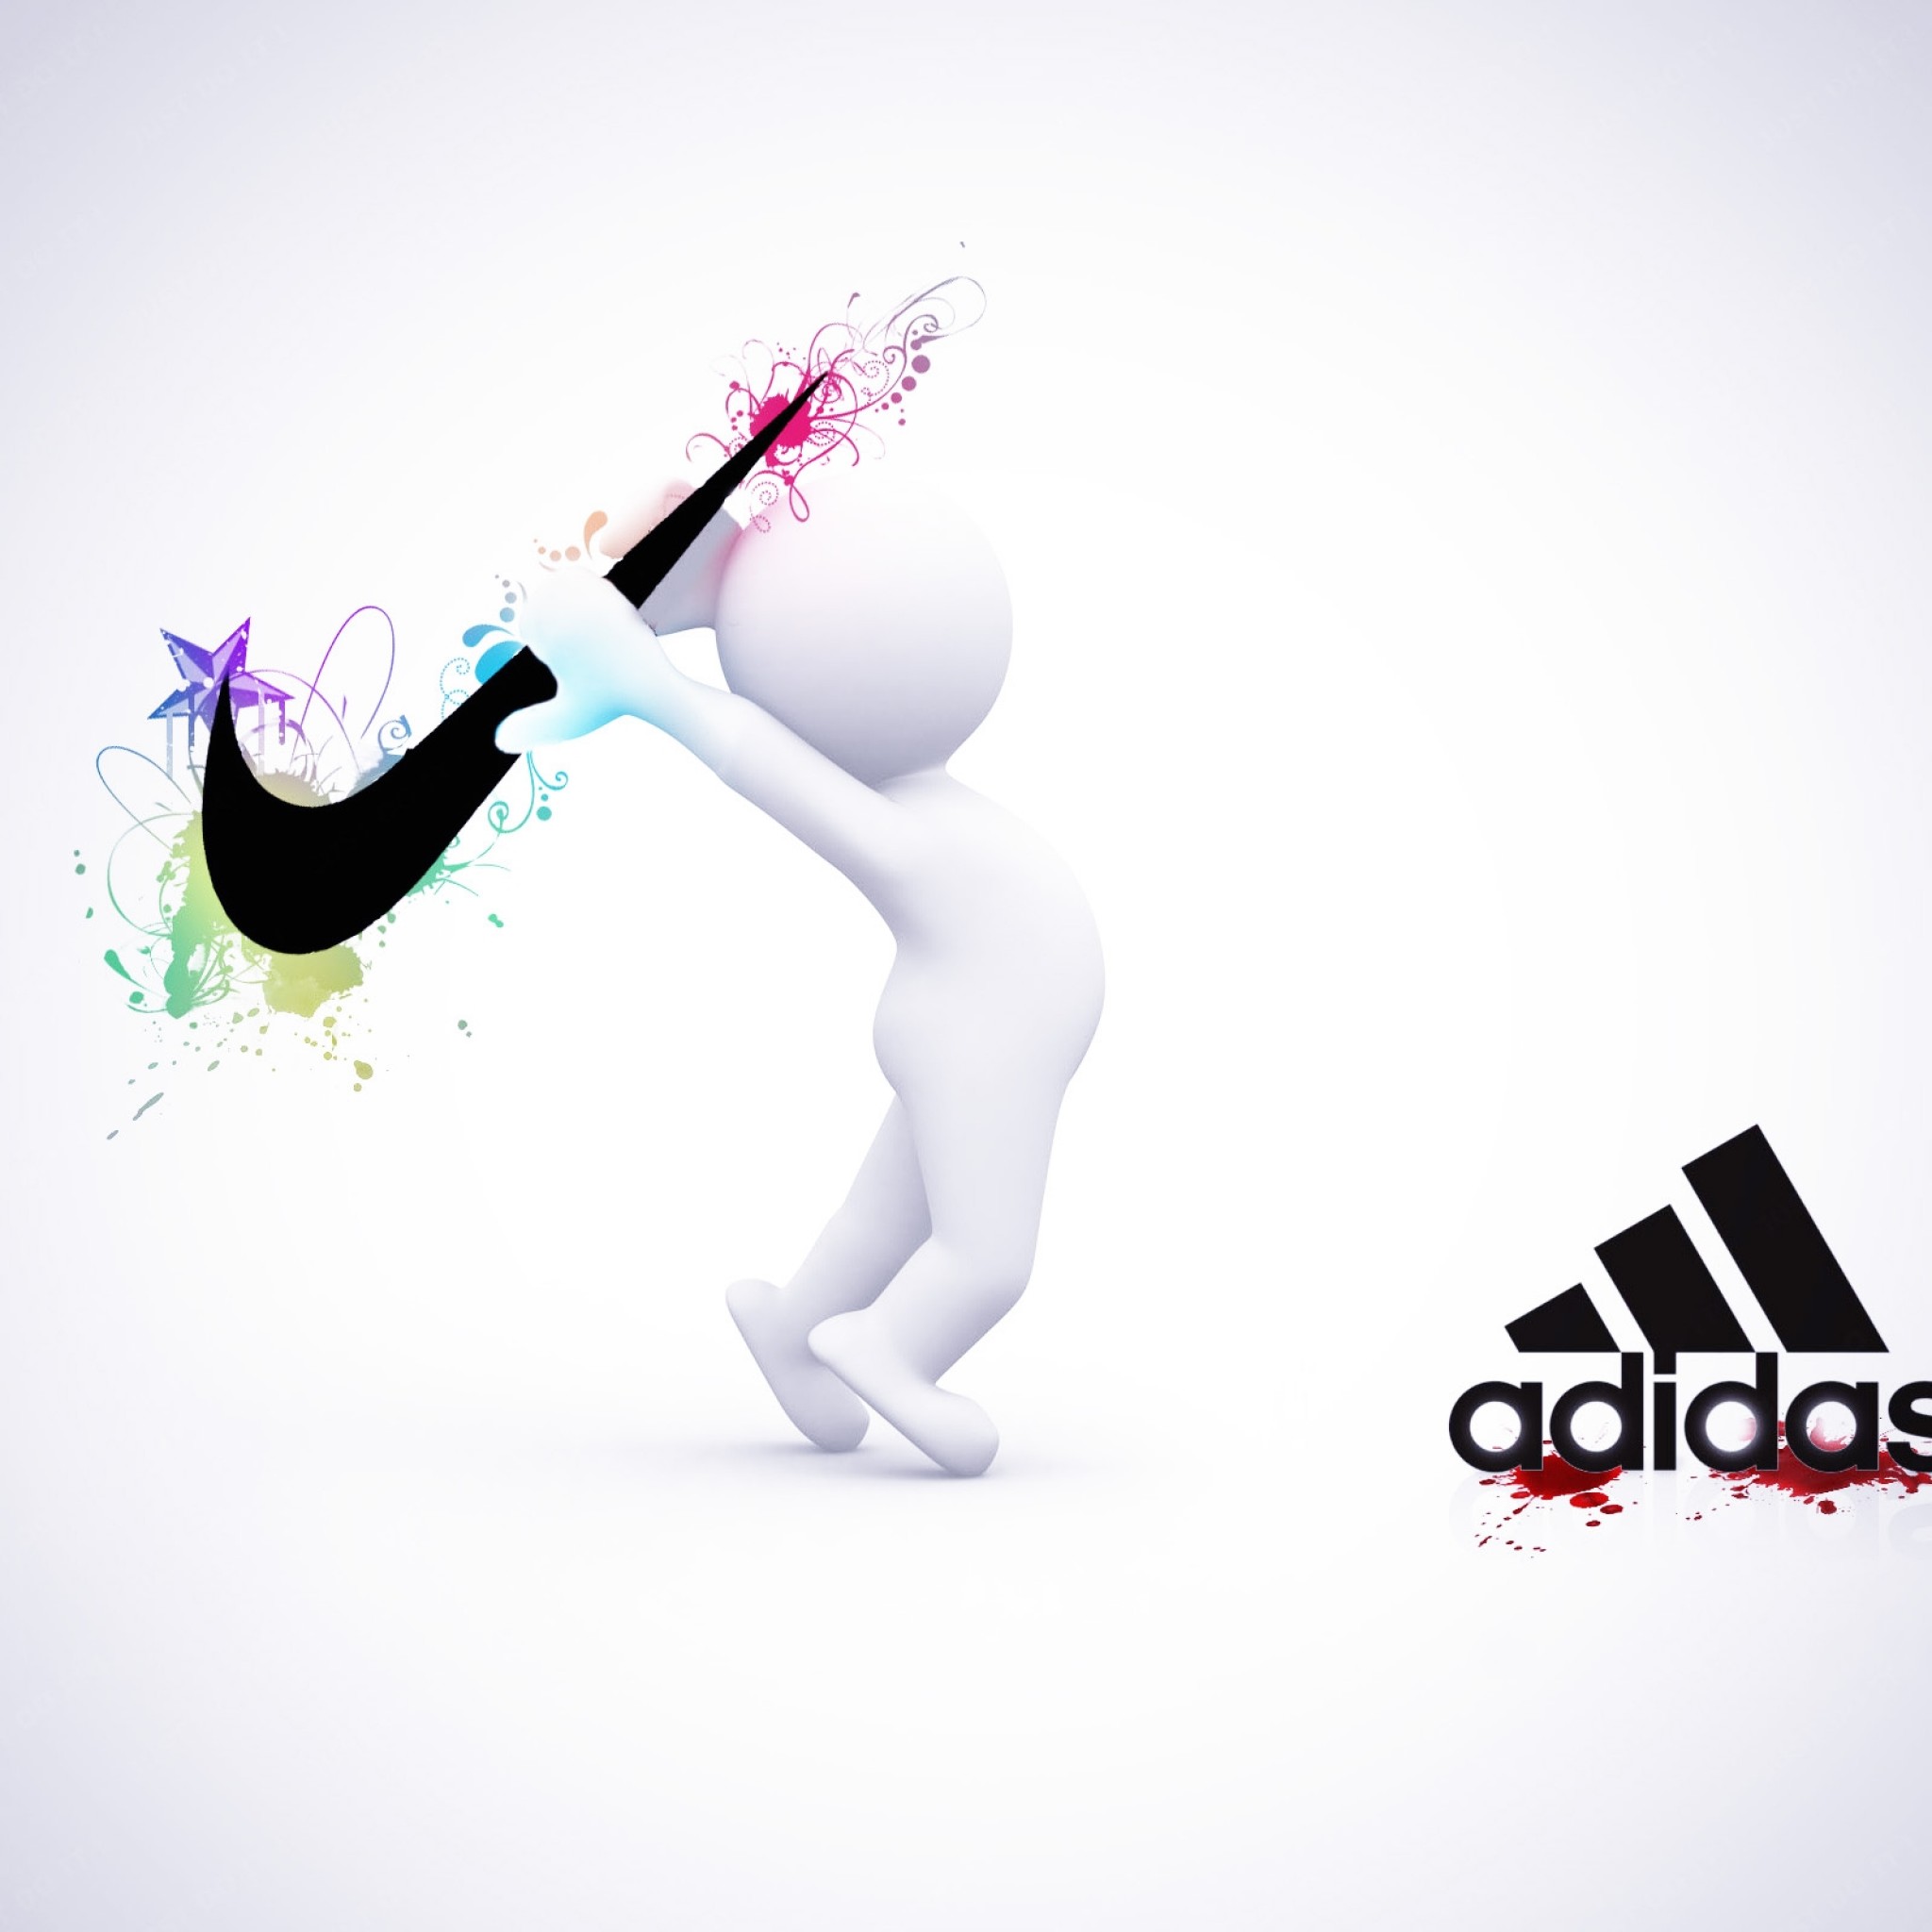 Cool Nike Wallpapers For Ipads iPad Wallpaper Gallery